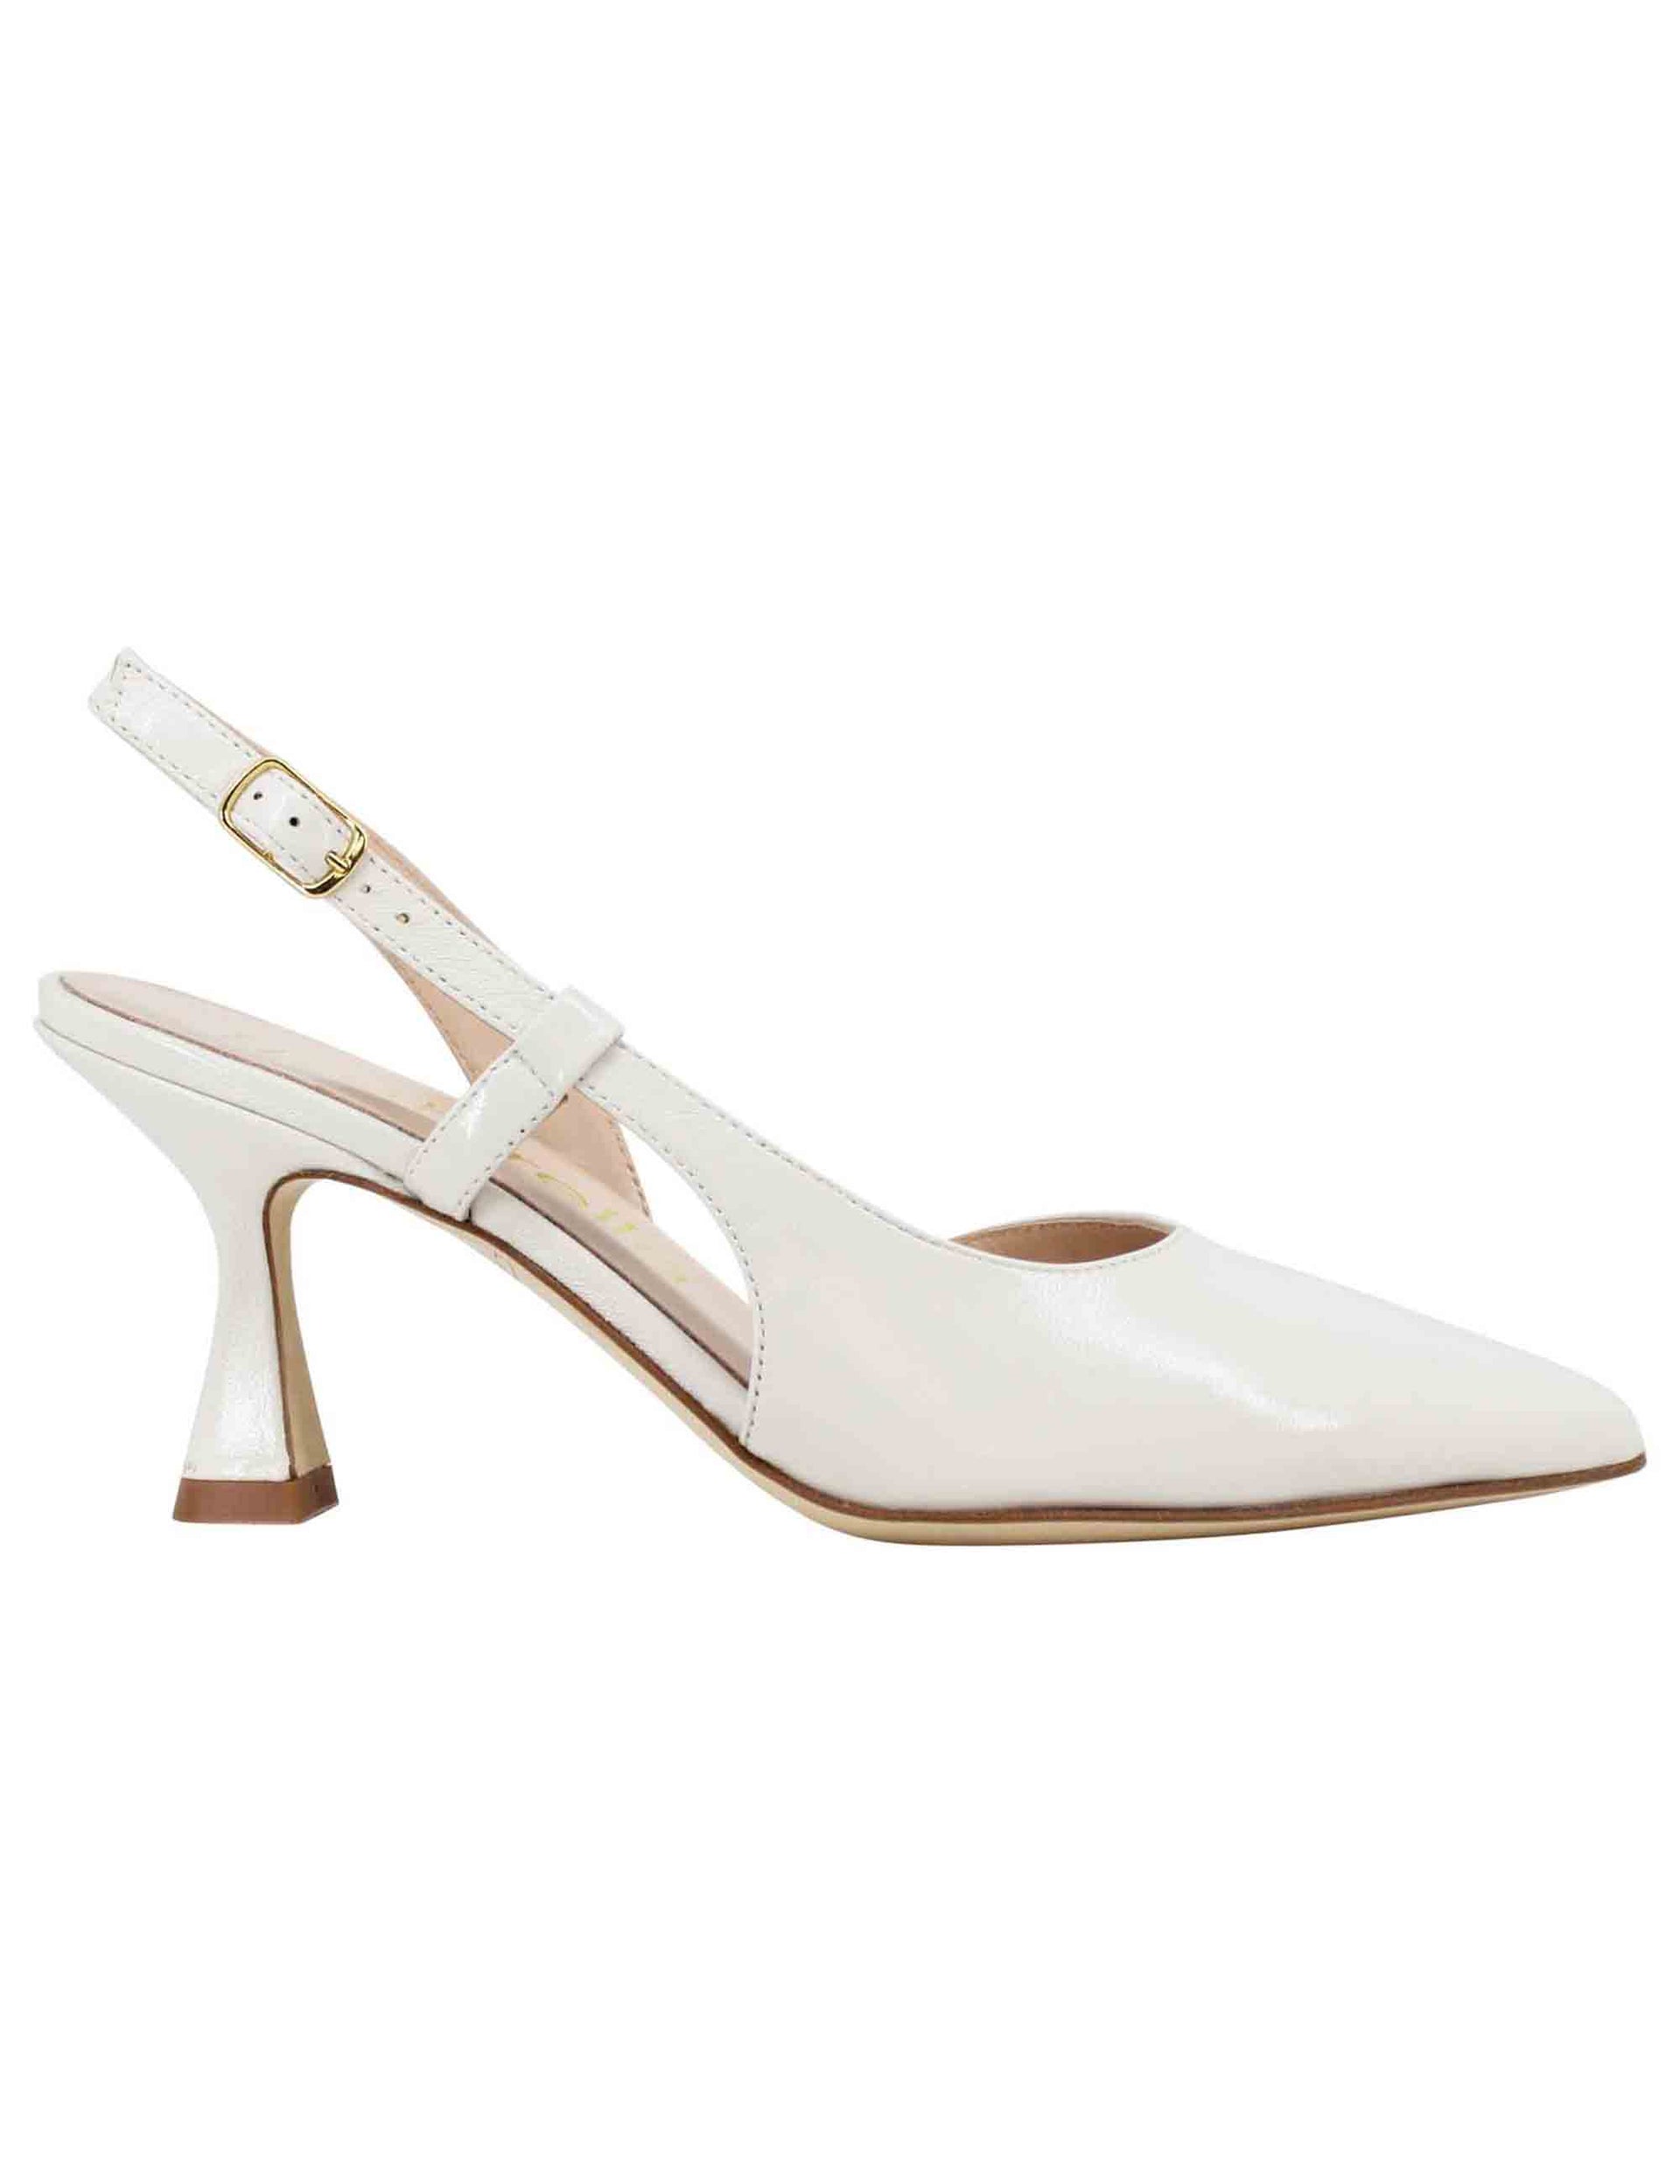 Women's off-white leather slingback pumps with high heel and asymmetric neckline